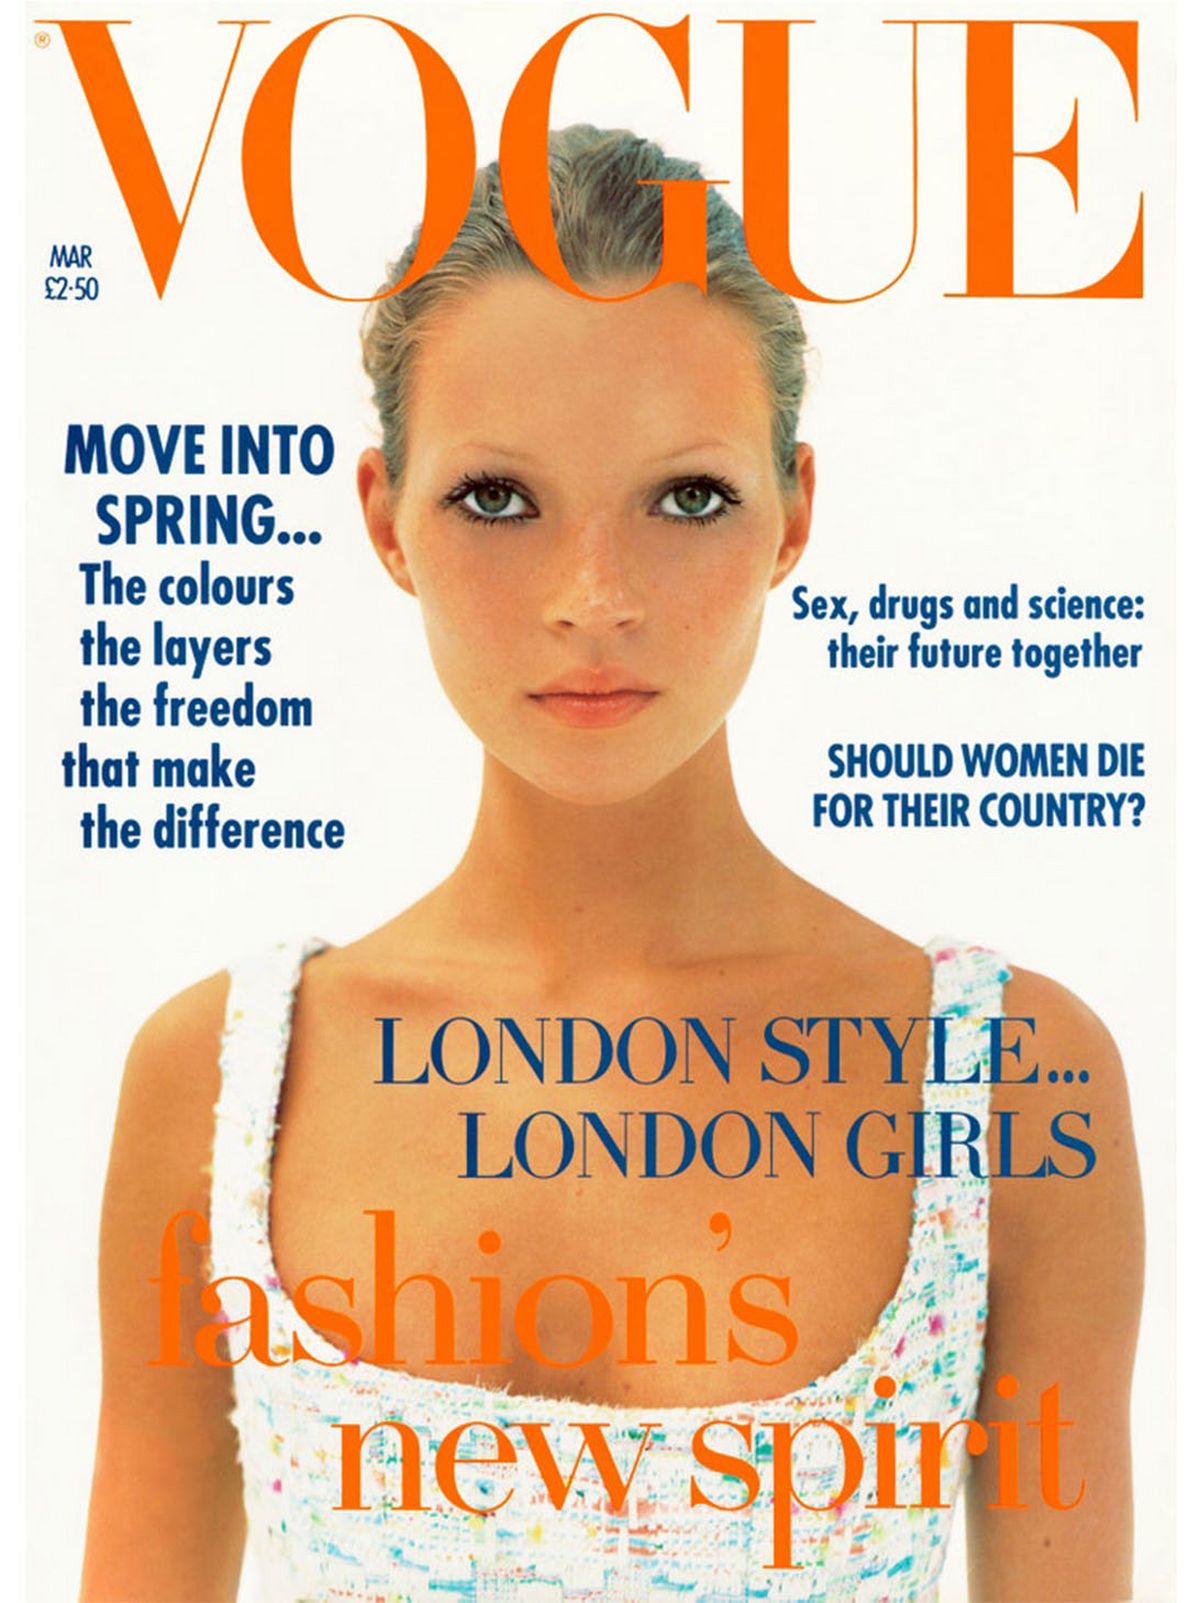 43 Times Kate Moss Appeared on the Cover of British Vogue | New